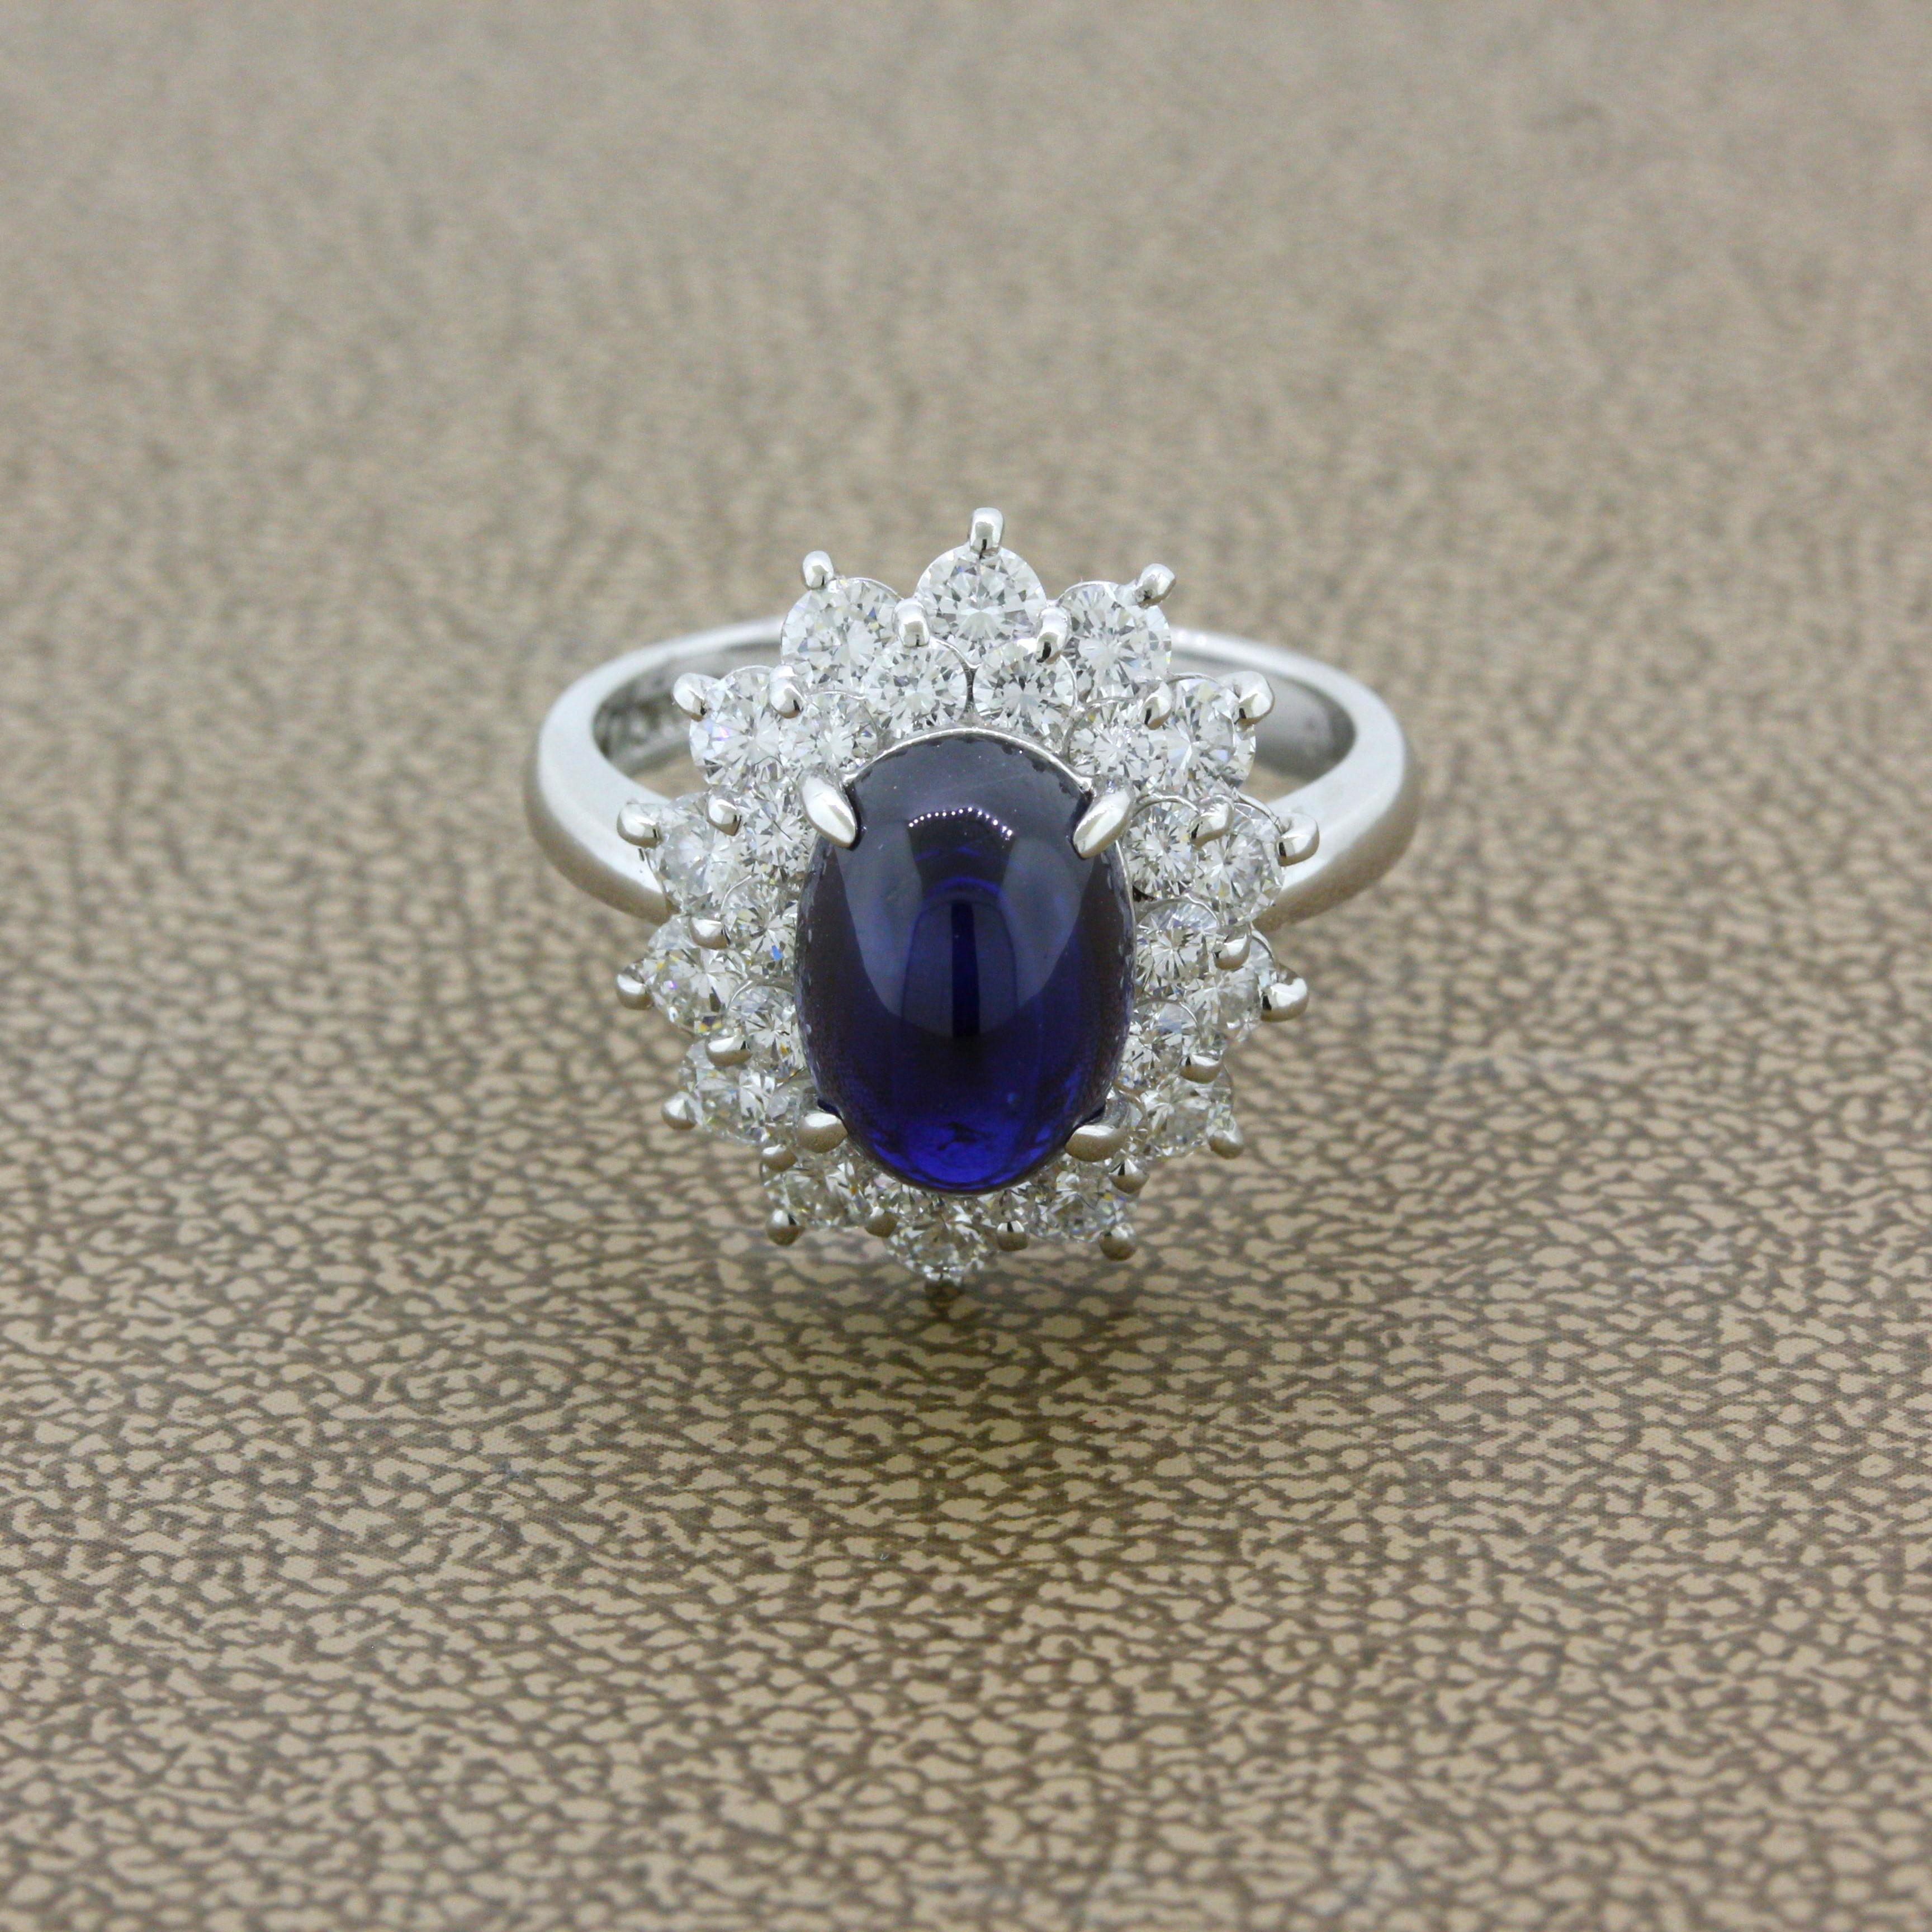 A chic and classy ring featuring a 4.90 carat sapphire with a rich vivid “royal” blue color that is so pleasing to the eye. It is complemented by 1.62 carats of bright white round brilliant-cut diamonds set around the sapphire in a Princess Diana